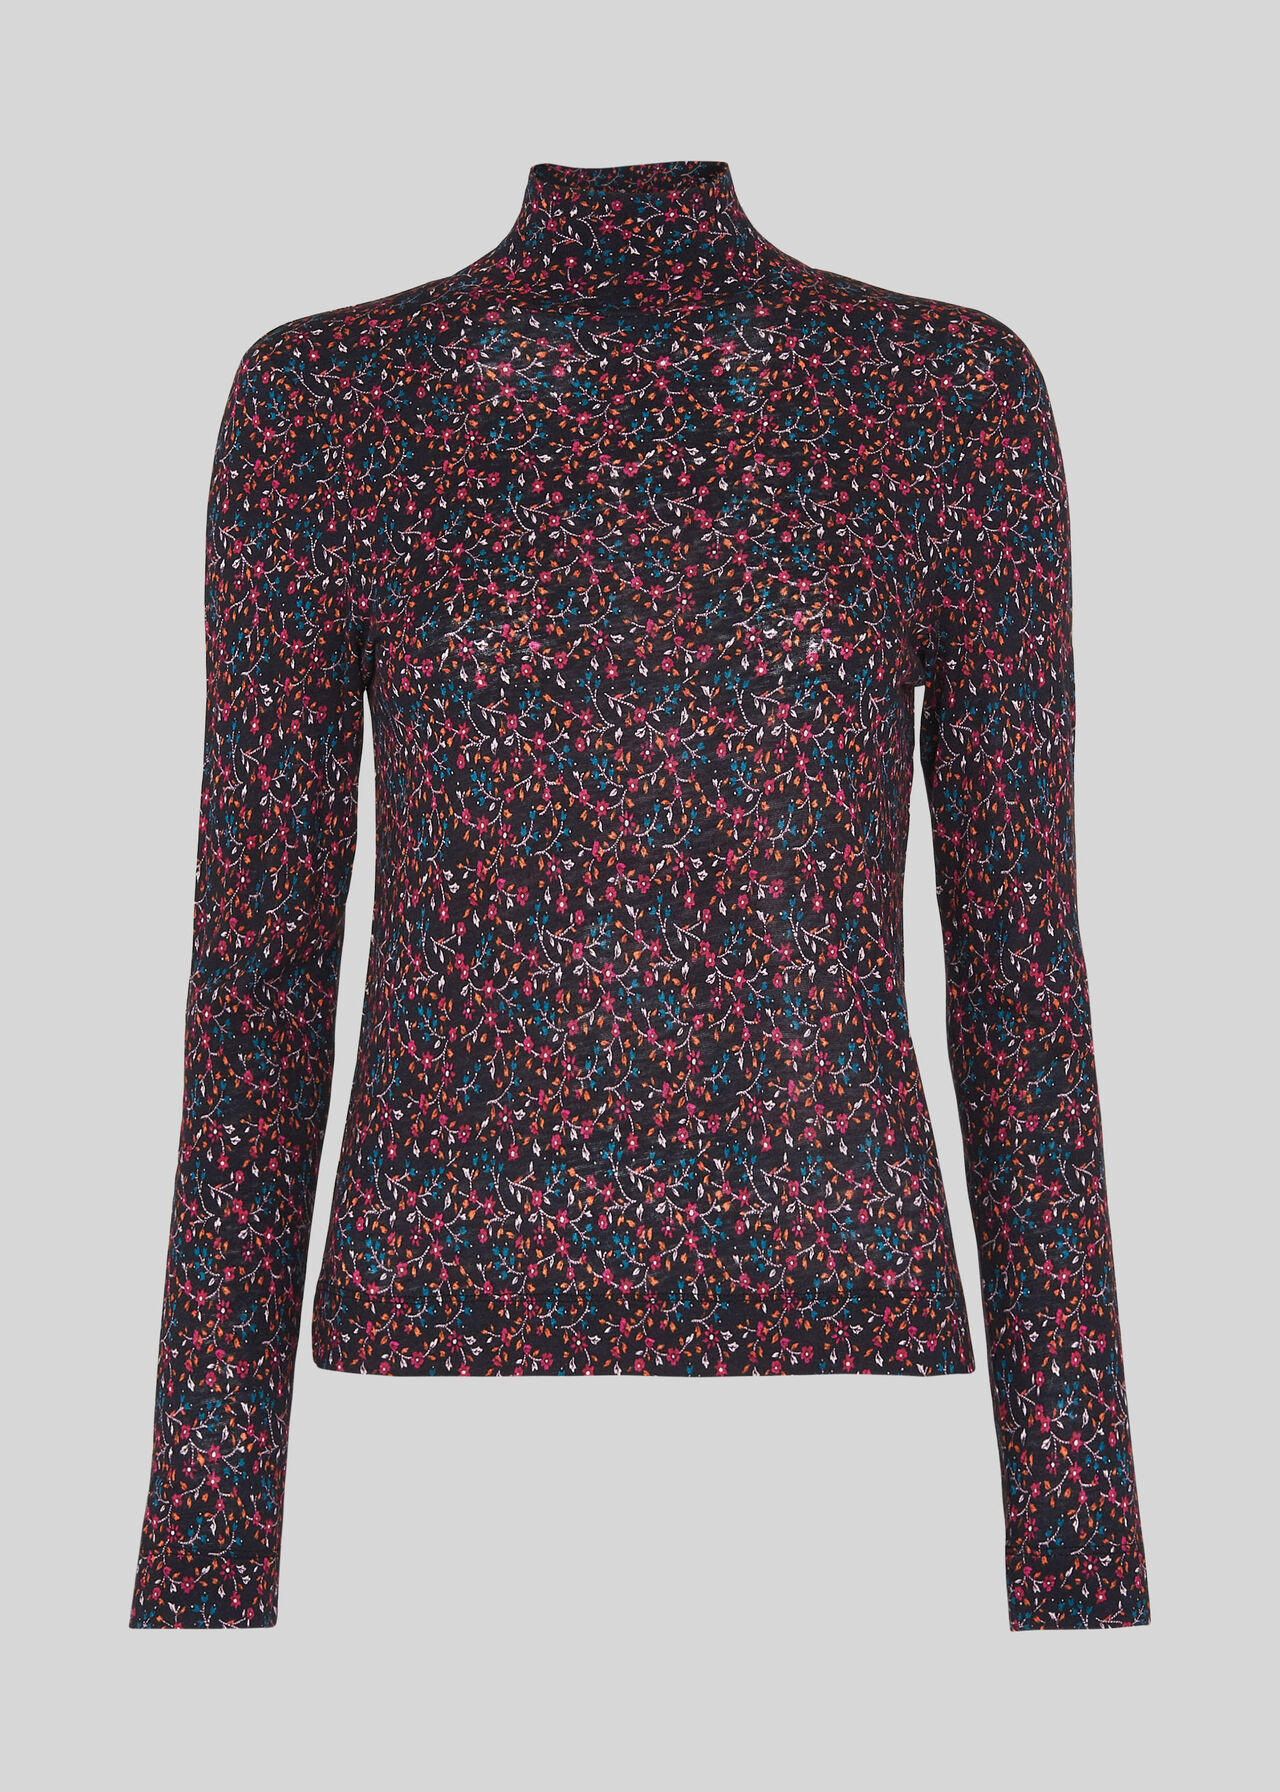 Star Print Floral Wool Mix Top Multicolour